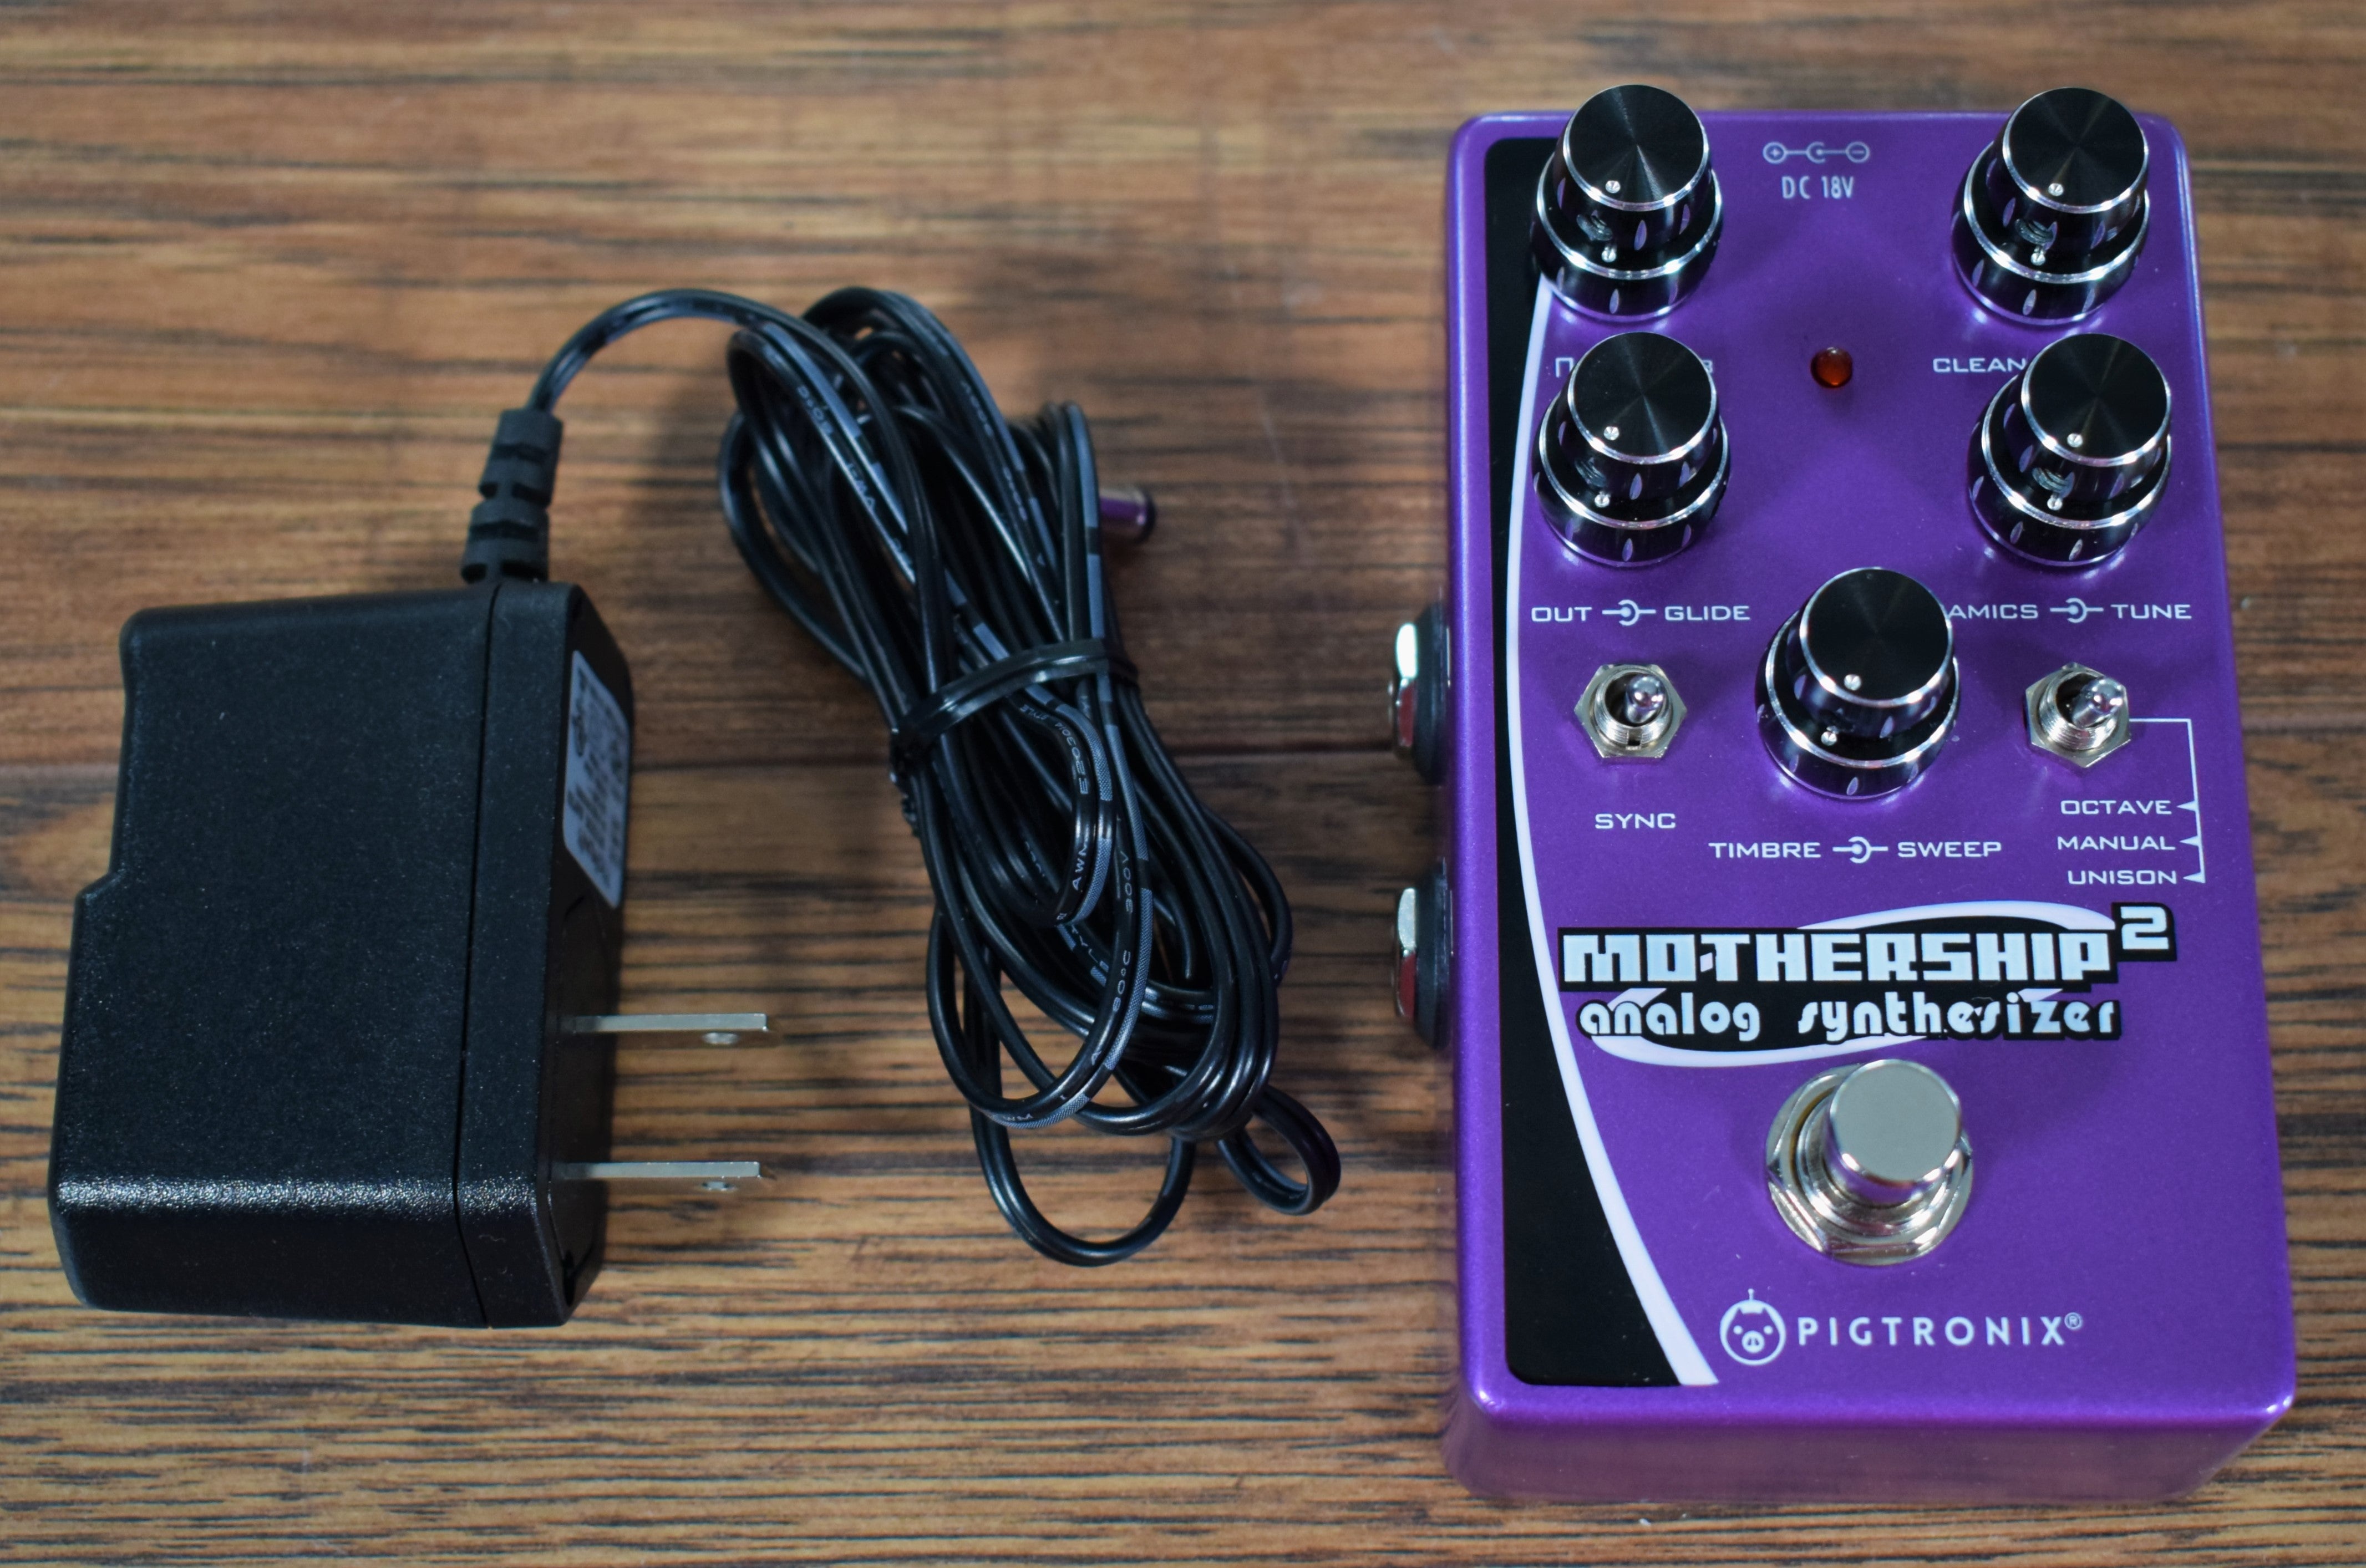 Pigtronix Mothership 2 Analog Synthesizer Guitar Effect Pedal Used